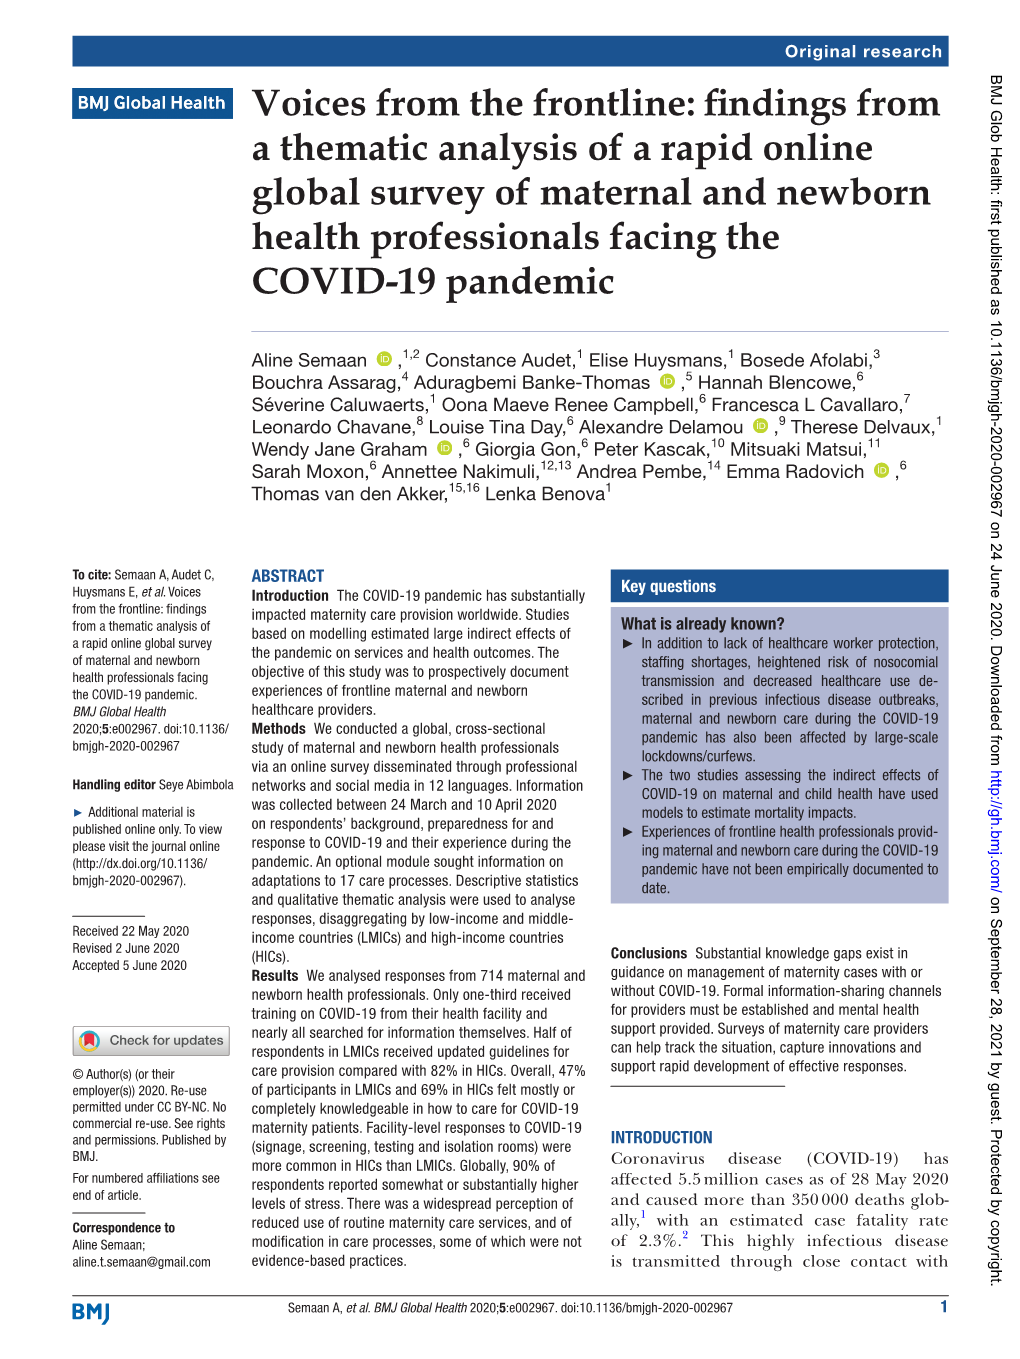 Voices from the Frontline: Findings from a Thematic Analysis of a Rapid Online Global Survey of Maternal and Newborn Health Professionals Facing the COVID-19 Pandemic